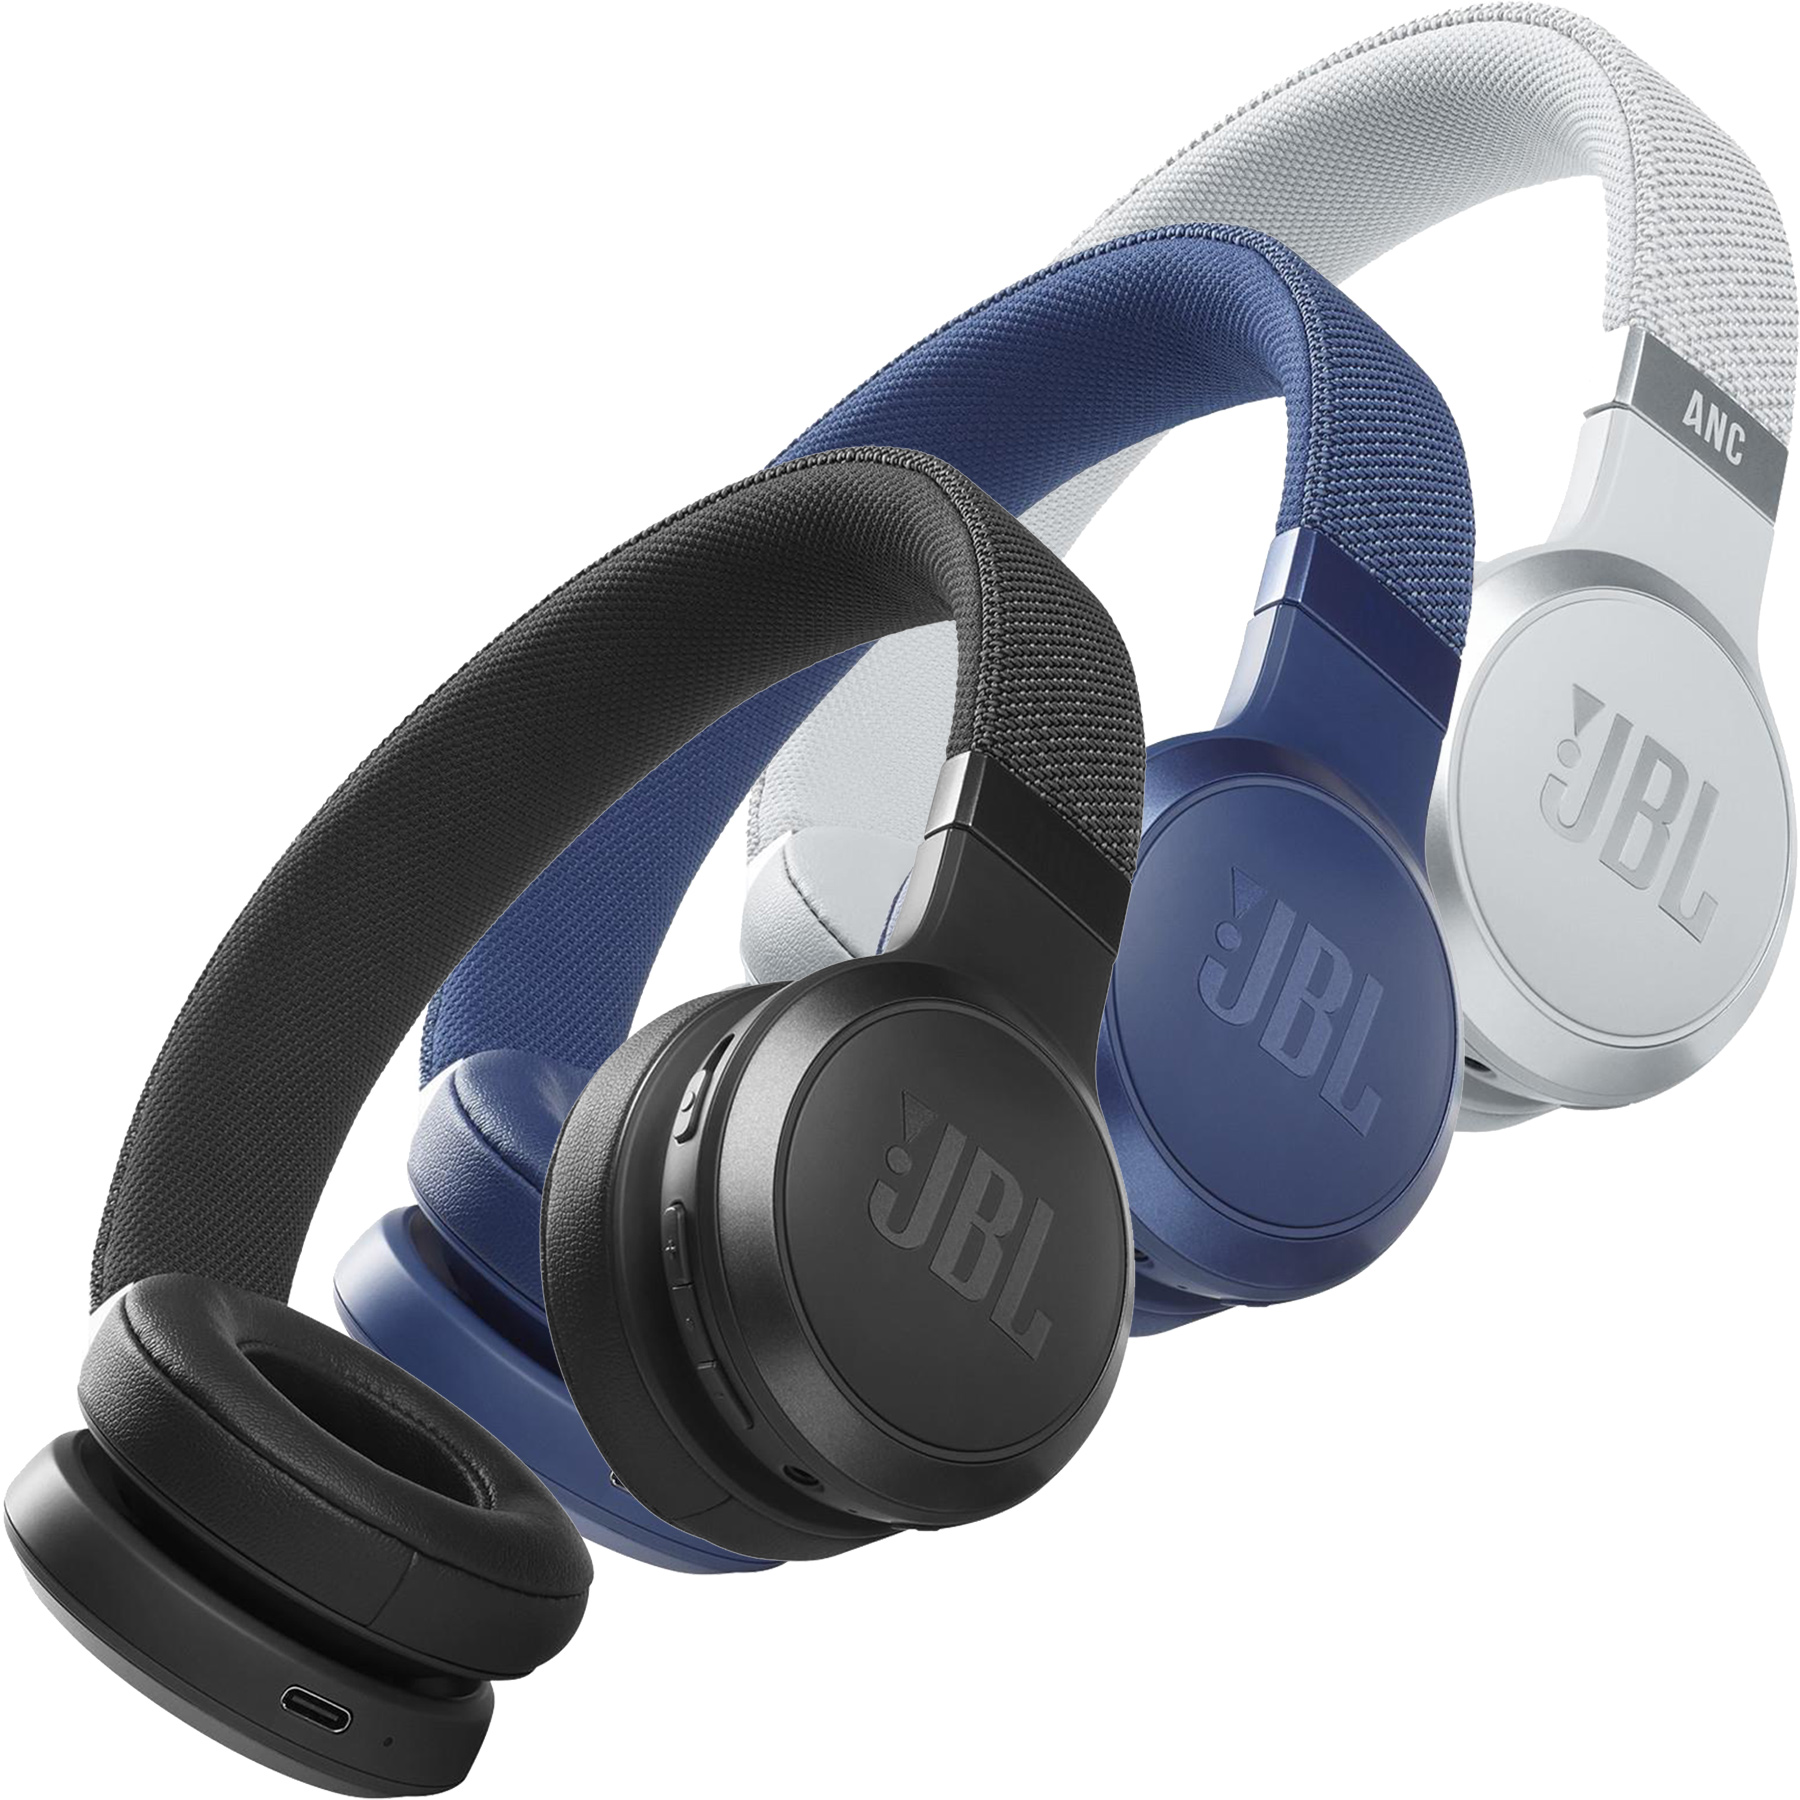 JBL Live 660NC Over Ear Headphones - HPG - Promotional Products Supplier